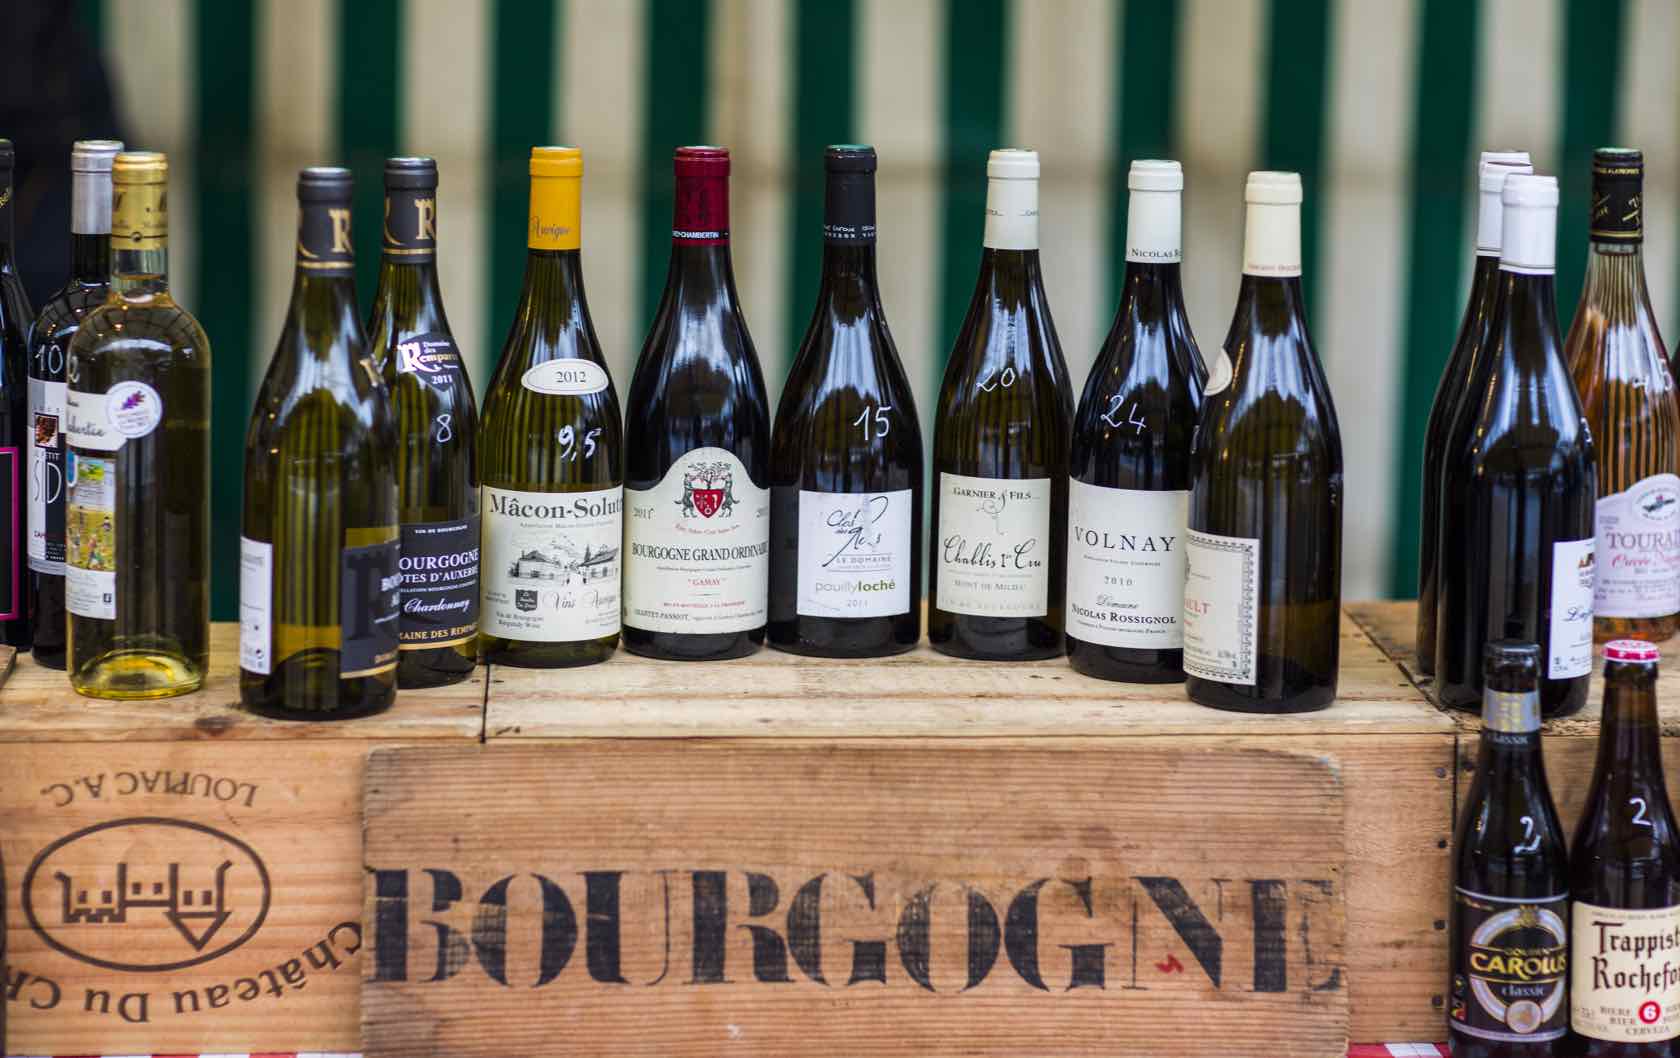 The 10 Wine Labels That Made The Emily In Paris Wine List